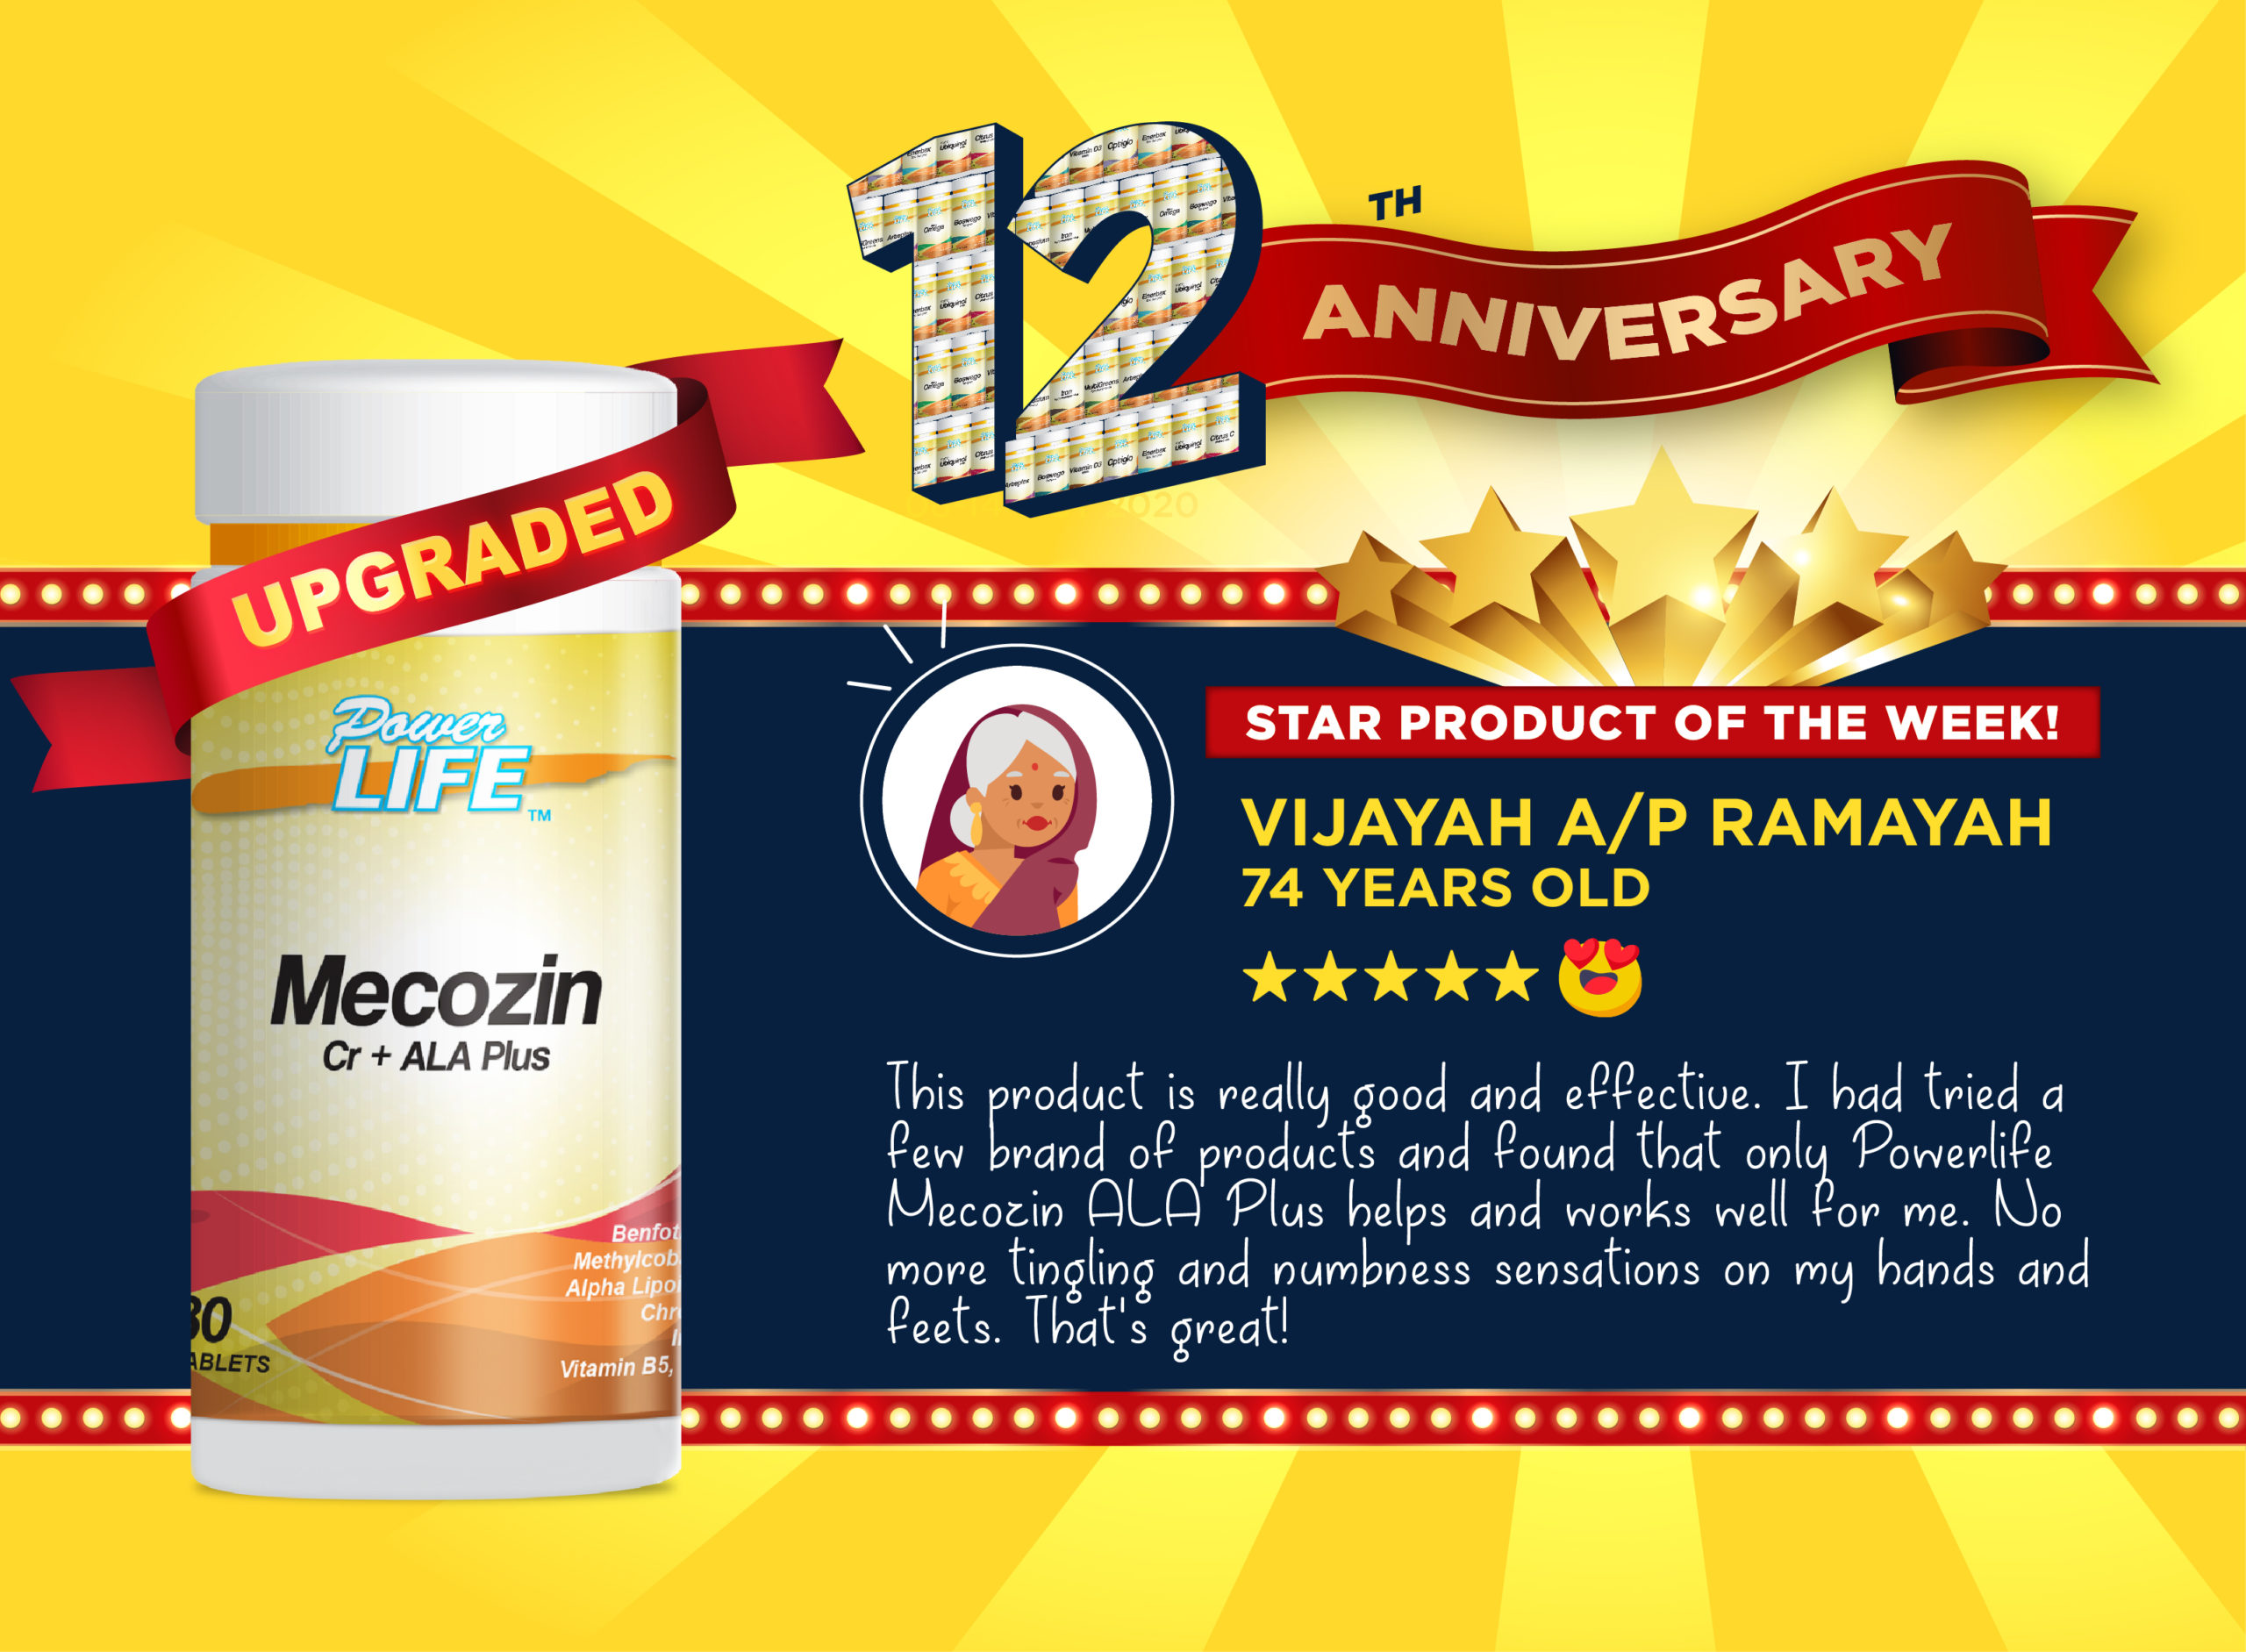 Powerlife Mecozin Cr + ALA is rated as 5 star product.